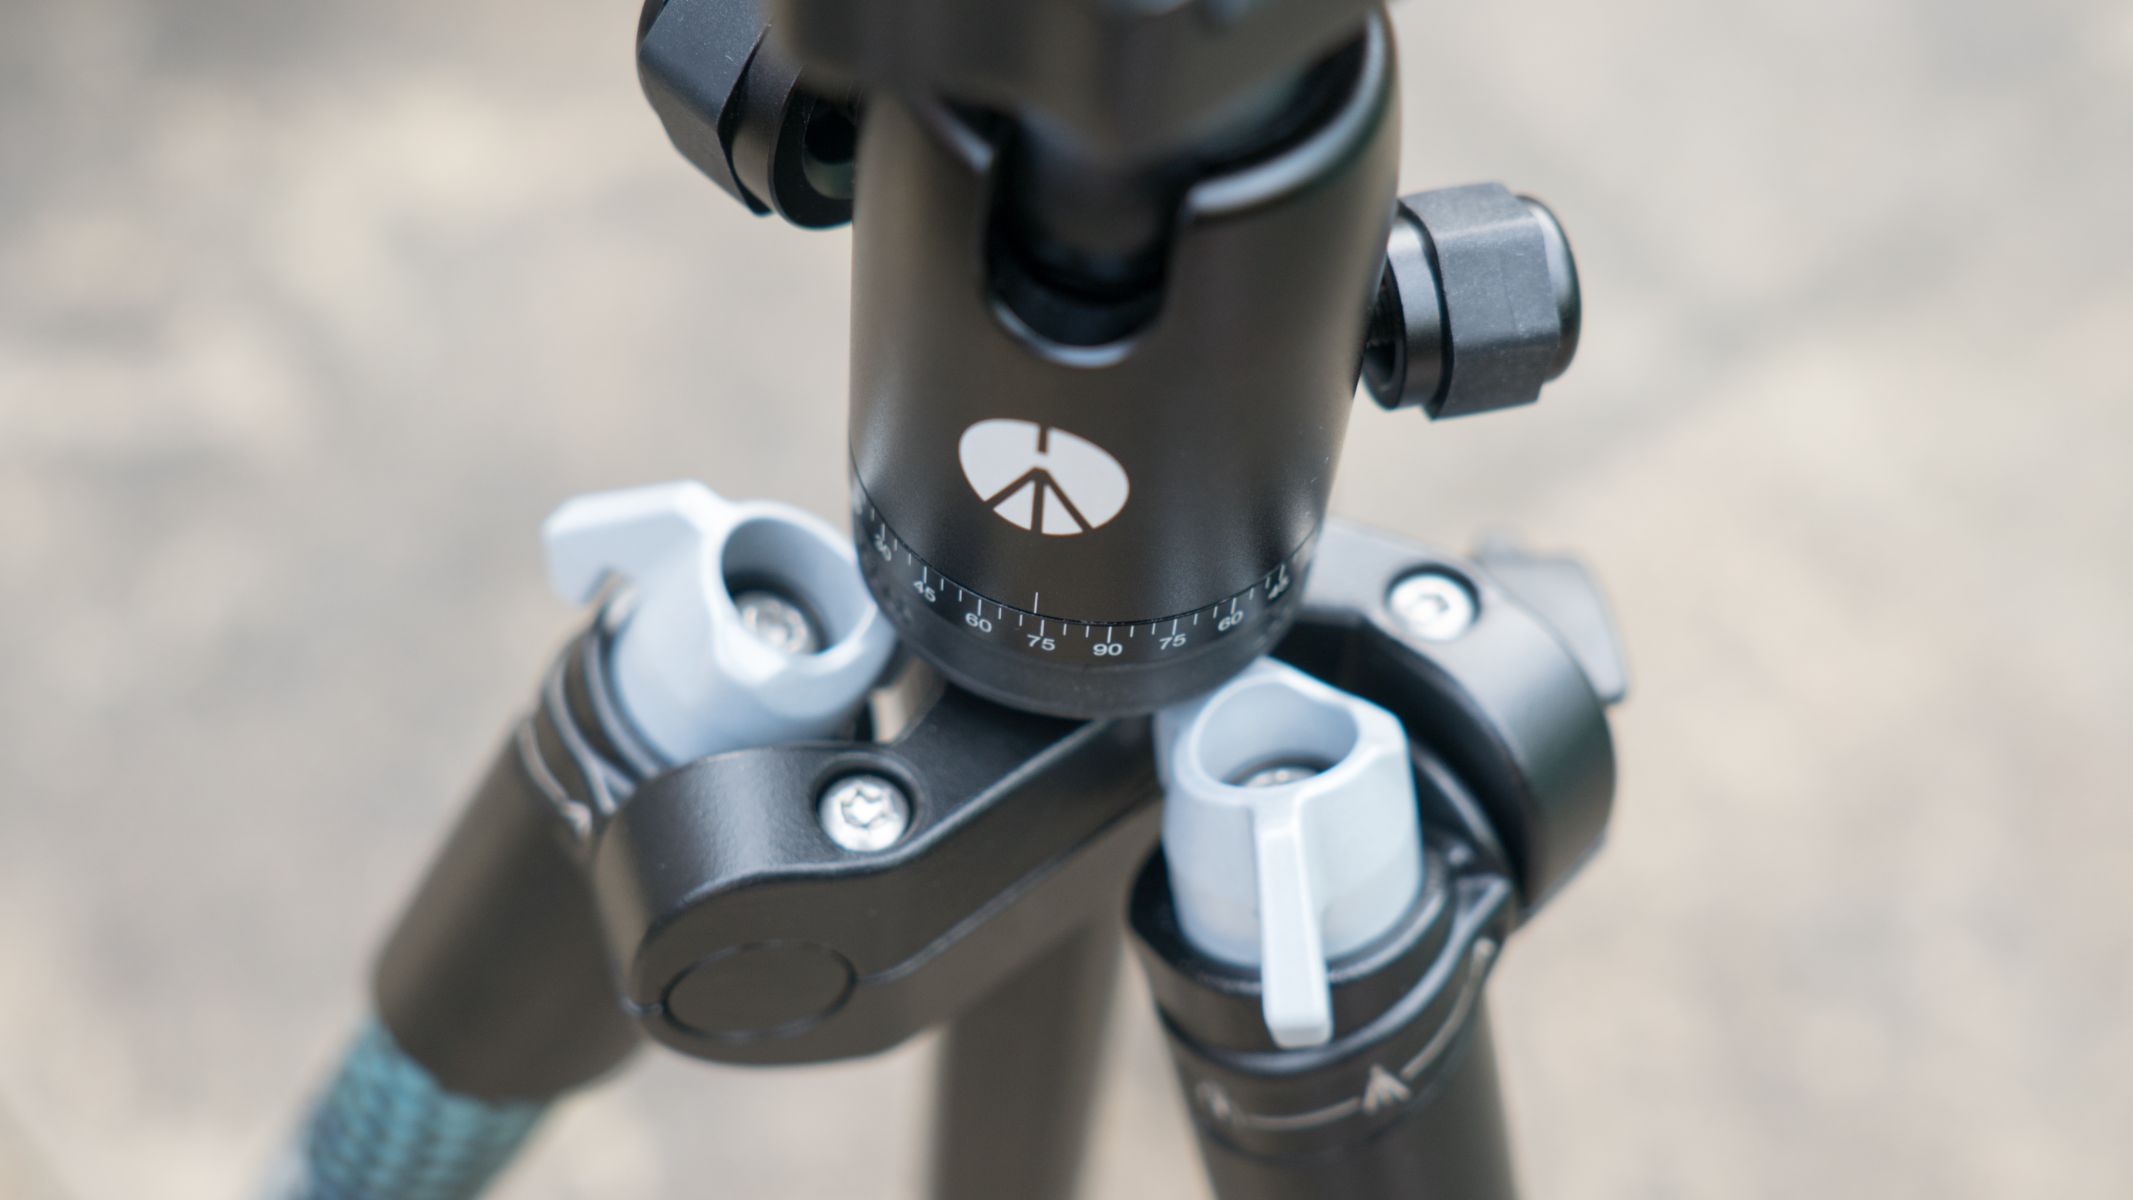 A close up view of the locking levers on the tripod legs